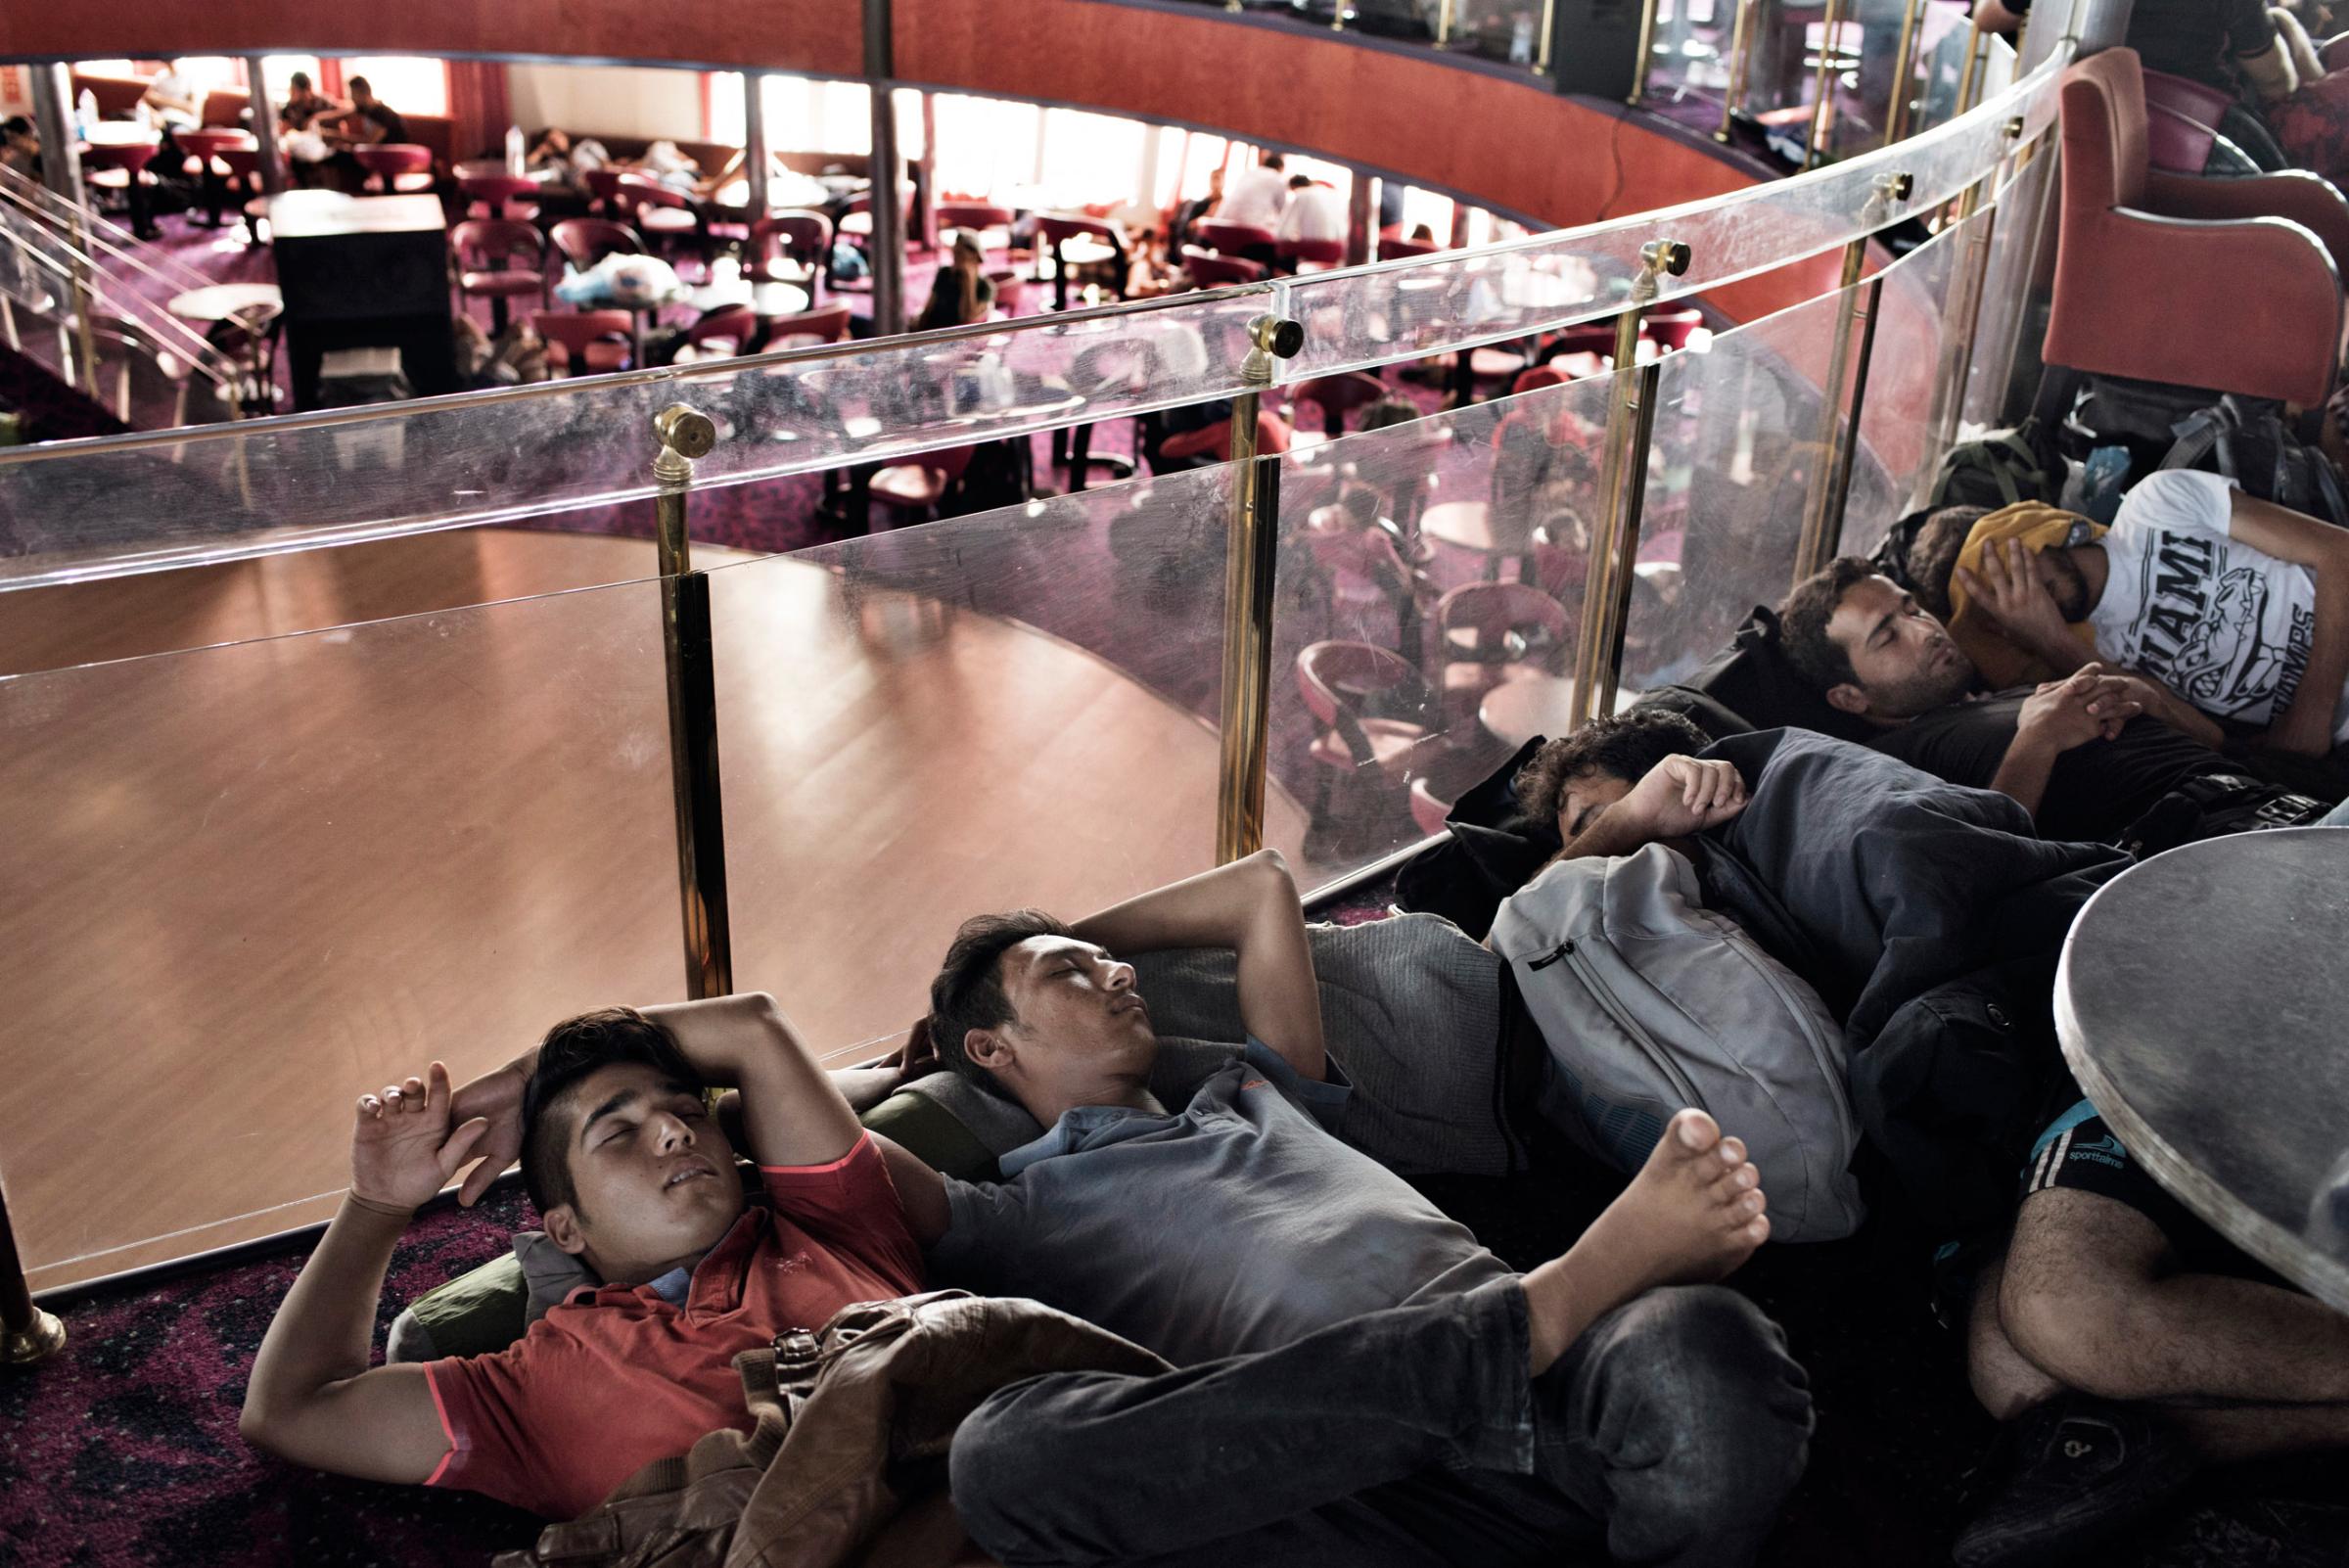 KOY201509060155, 157, 165Migrants rest and recharge their phones aboard a cruise ship that the Greek government chartered to transport them to Athens from the Greek island of Lesbos. The regular ferry service traveling this route was unable to cope with the unprecedented influx of migrants going through Greece to Western Europe from various conflict zones across the Muslim world.Photograph by Yuri Kozyrev/ NOOR for TIME